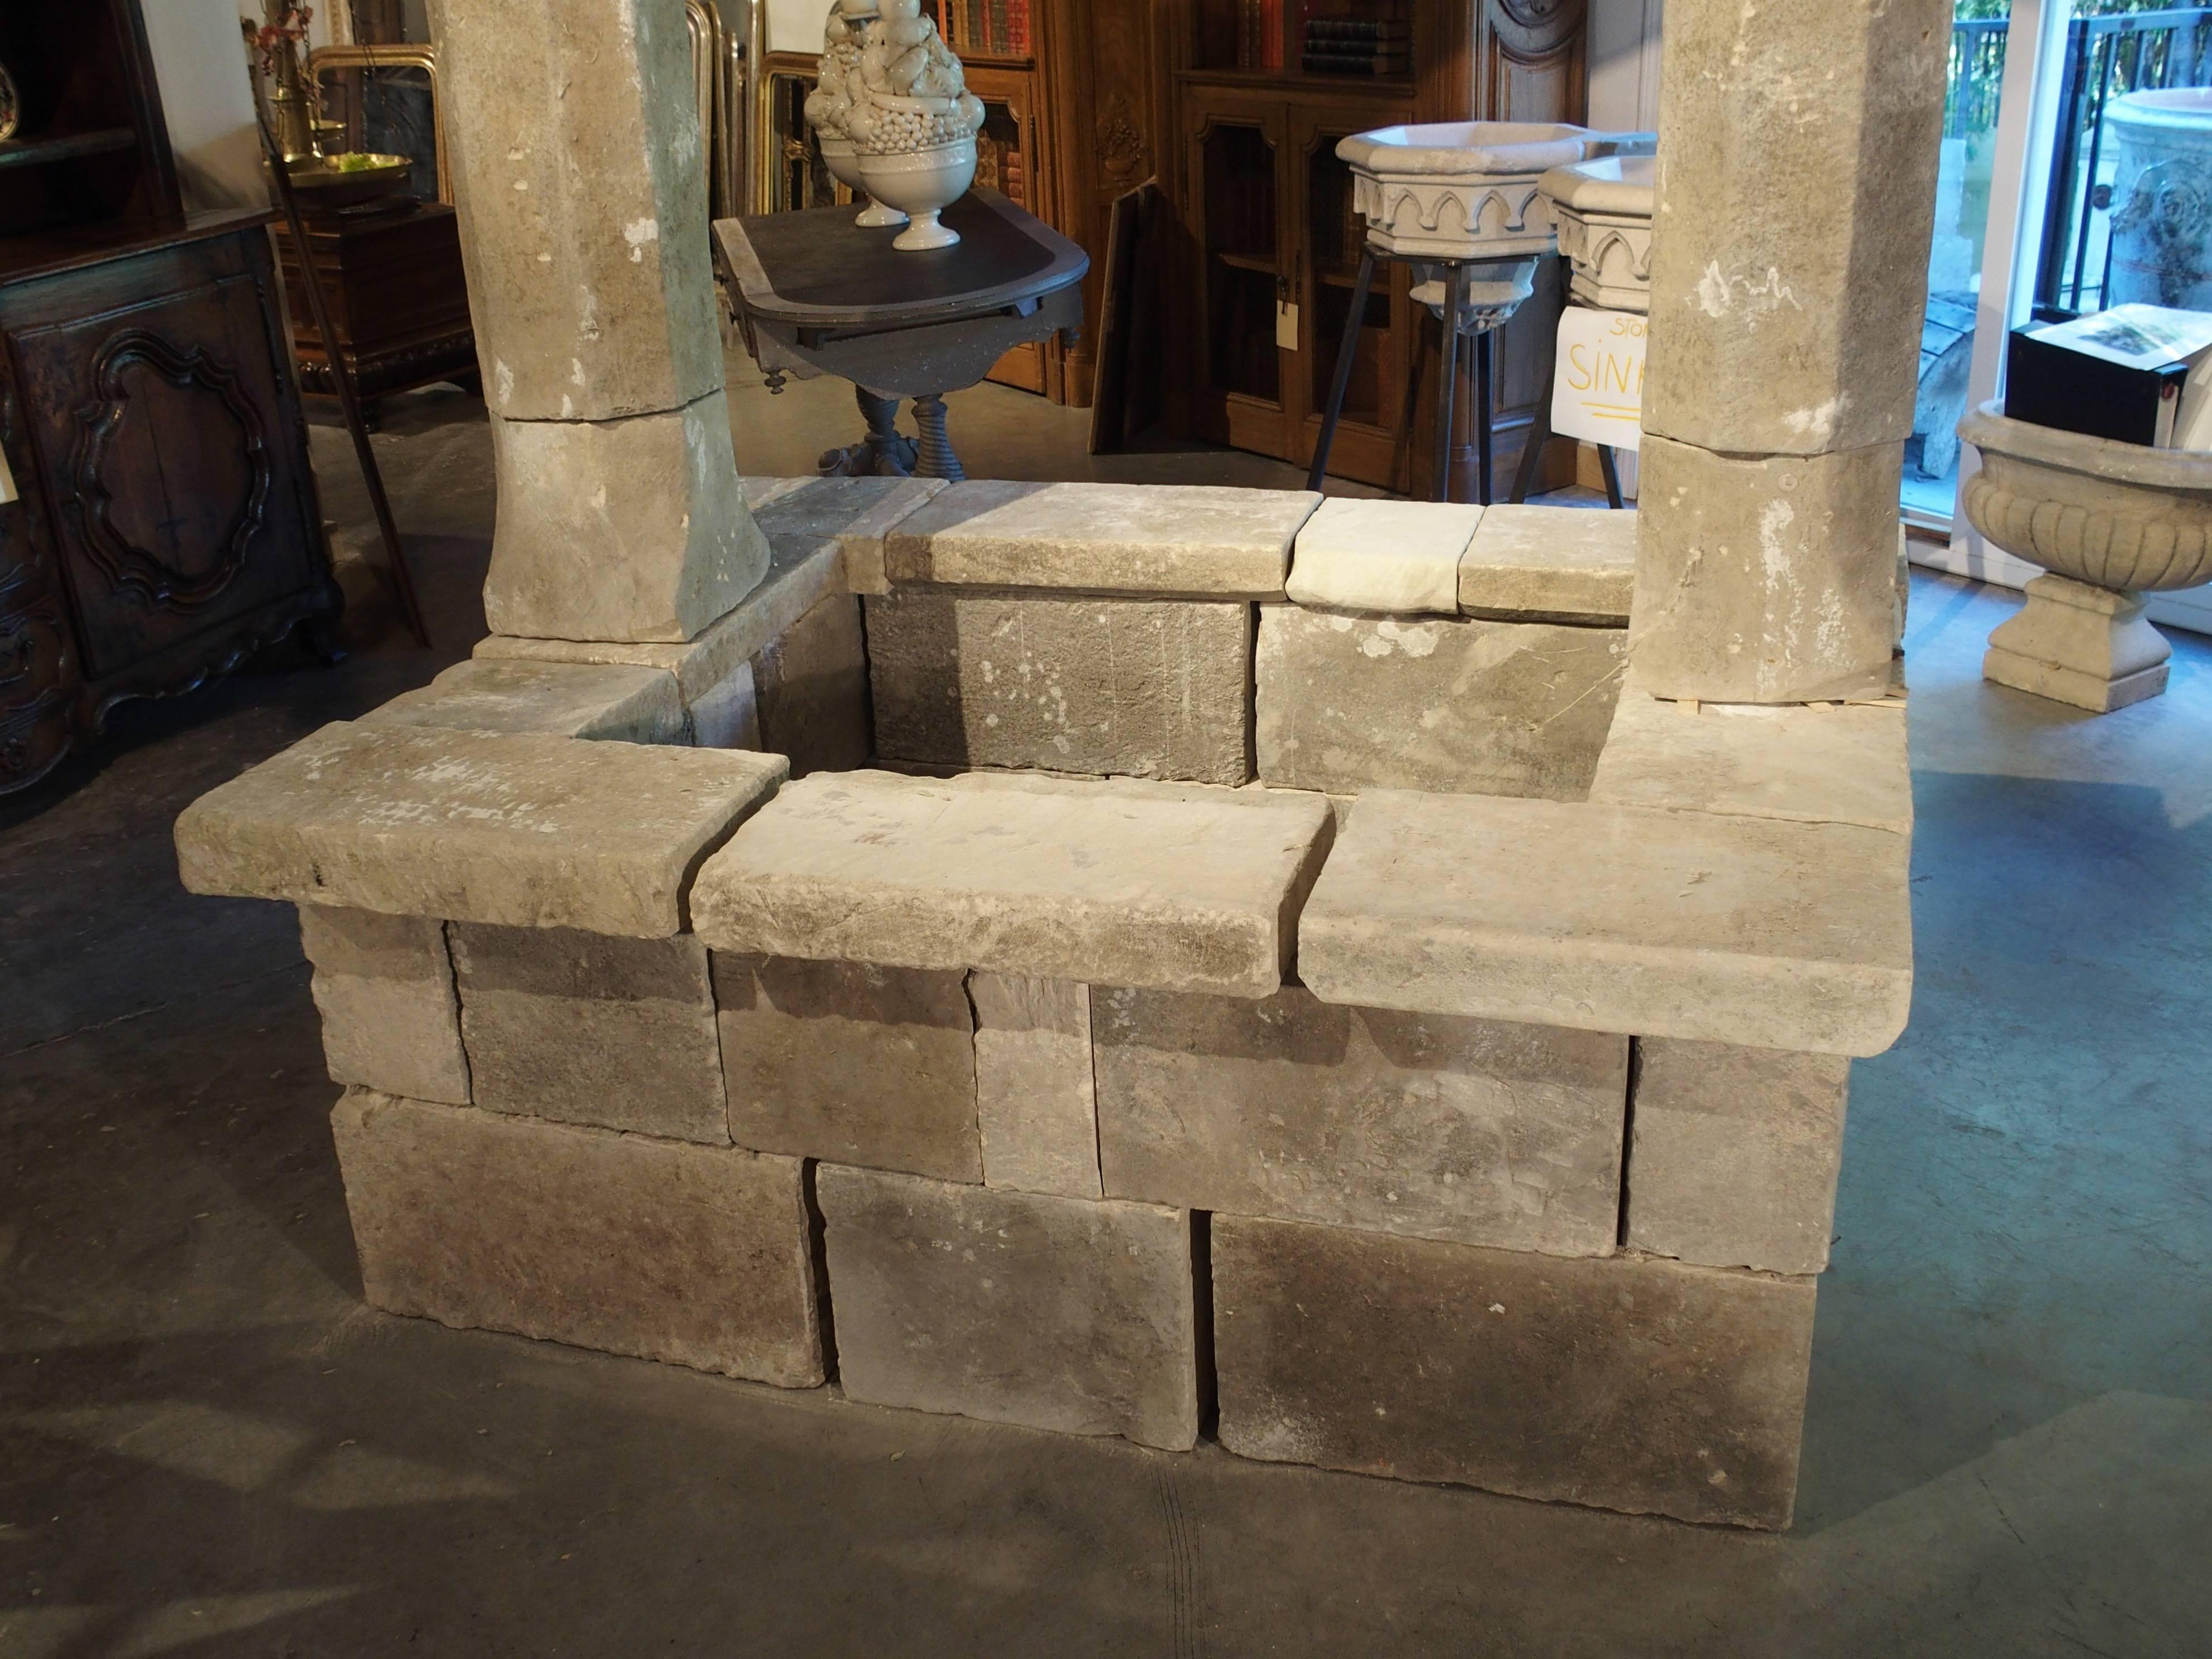 This elegant stone well is based on an antique well found in the Apulia region of Southern Italy. Apulia is known for having the richest archeological remains in Italy and was first colonized by the Mycenaean Greeks. The well has a rectangular basin